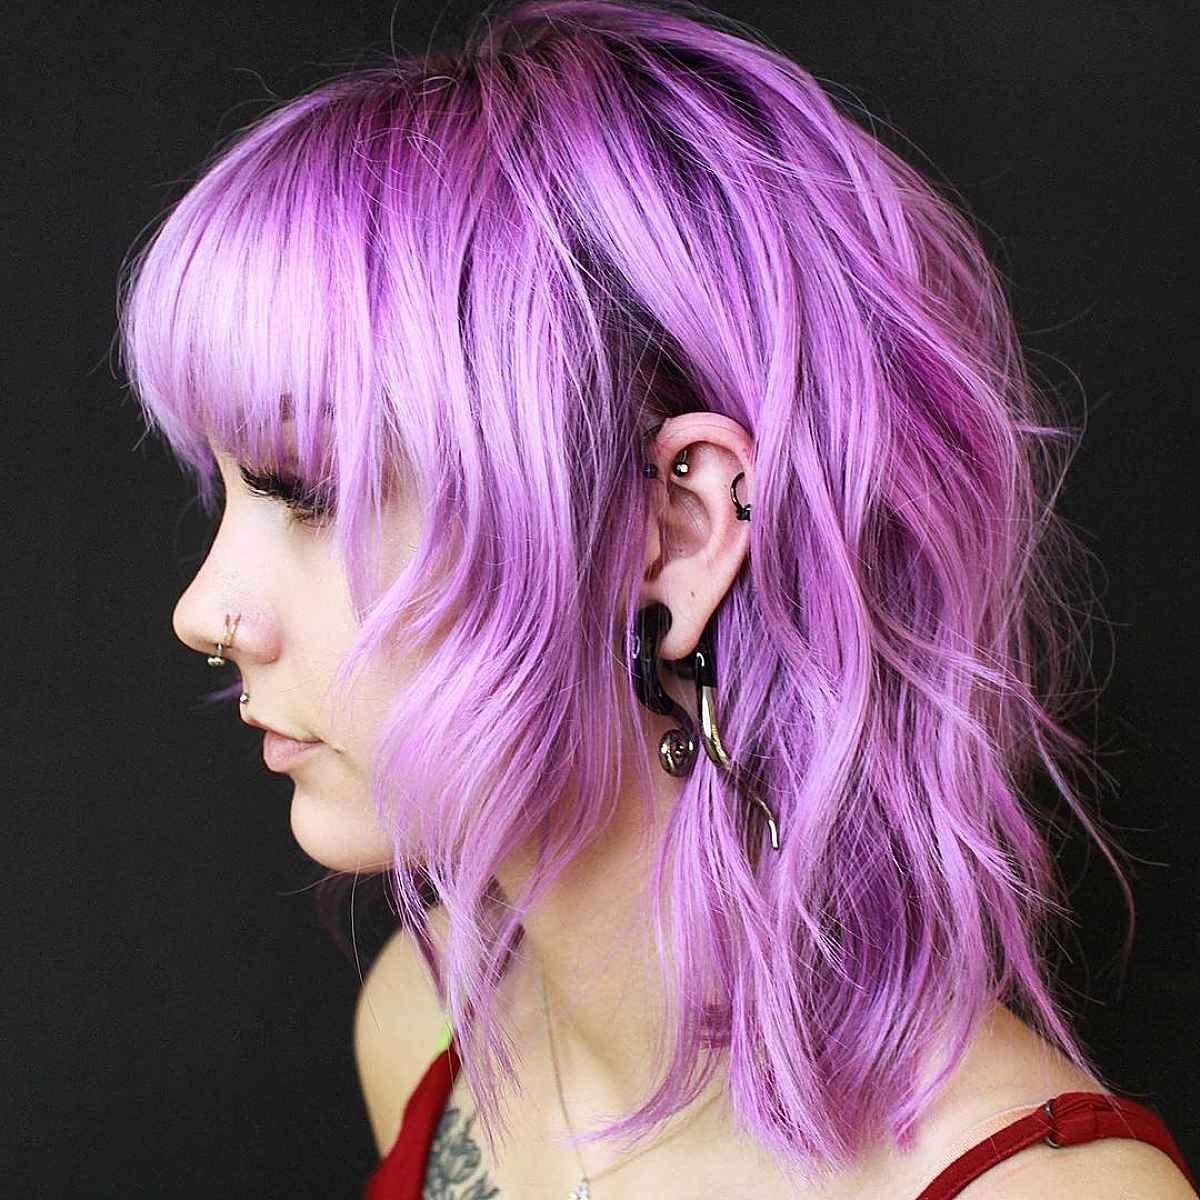 2018 Inverted Magenta Lob Haircuts With Regard To 16 Funky Inverted Bob Haircuts You Have To See (View 10 of 20)